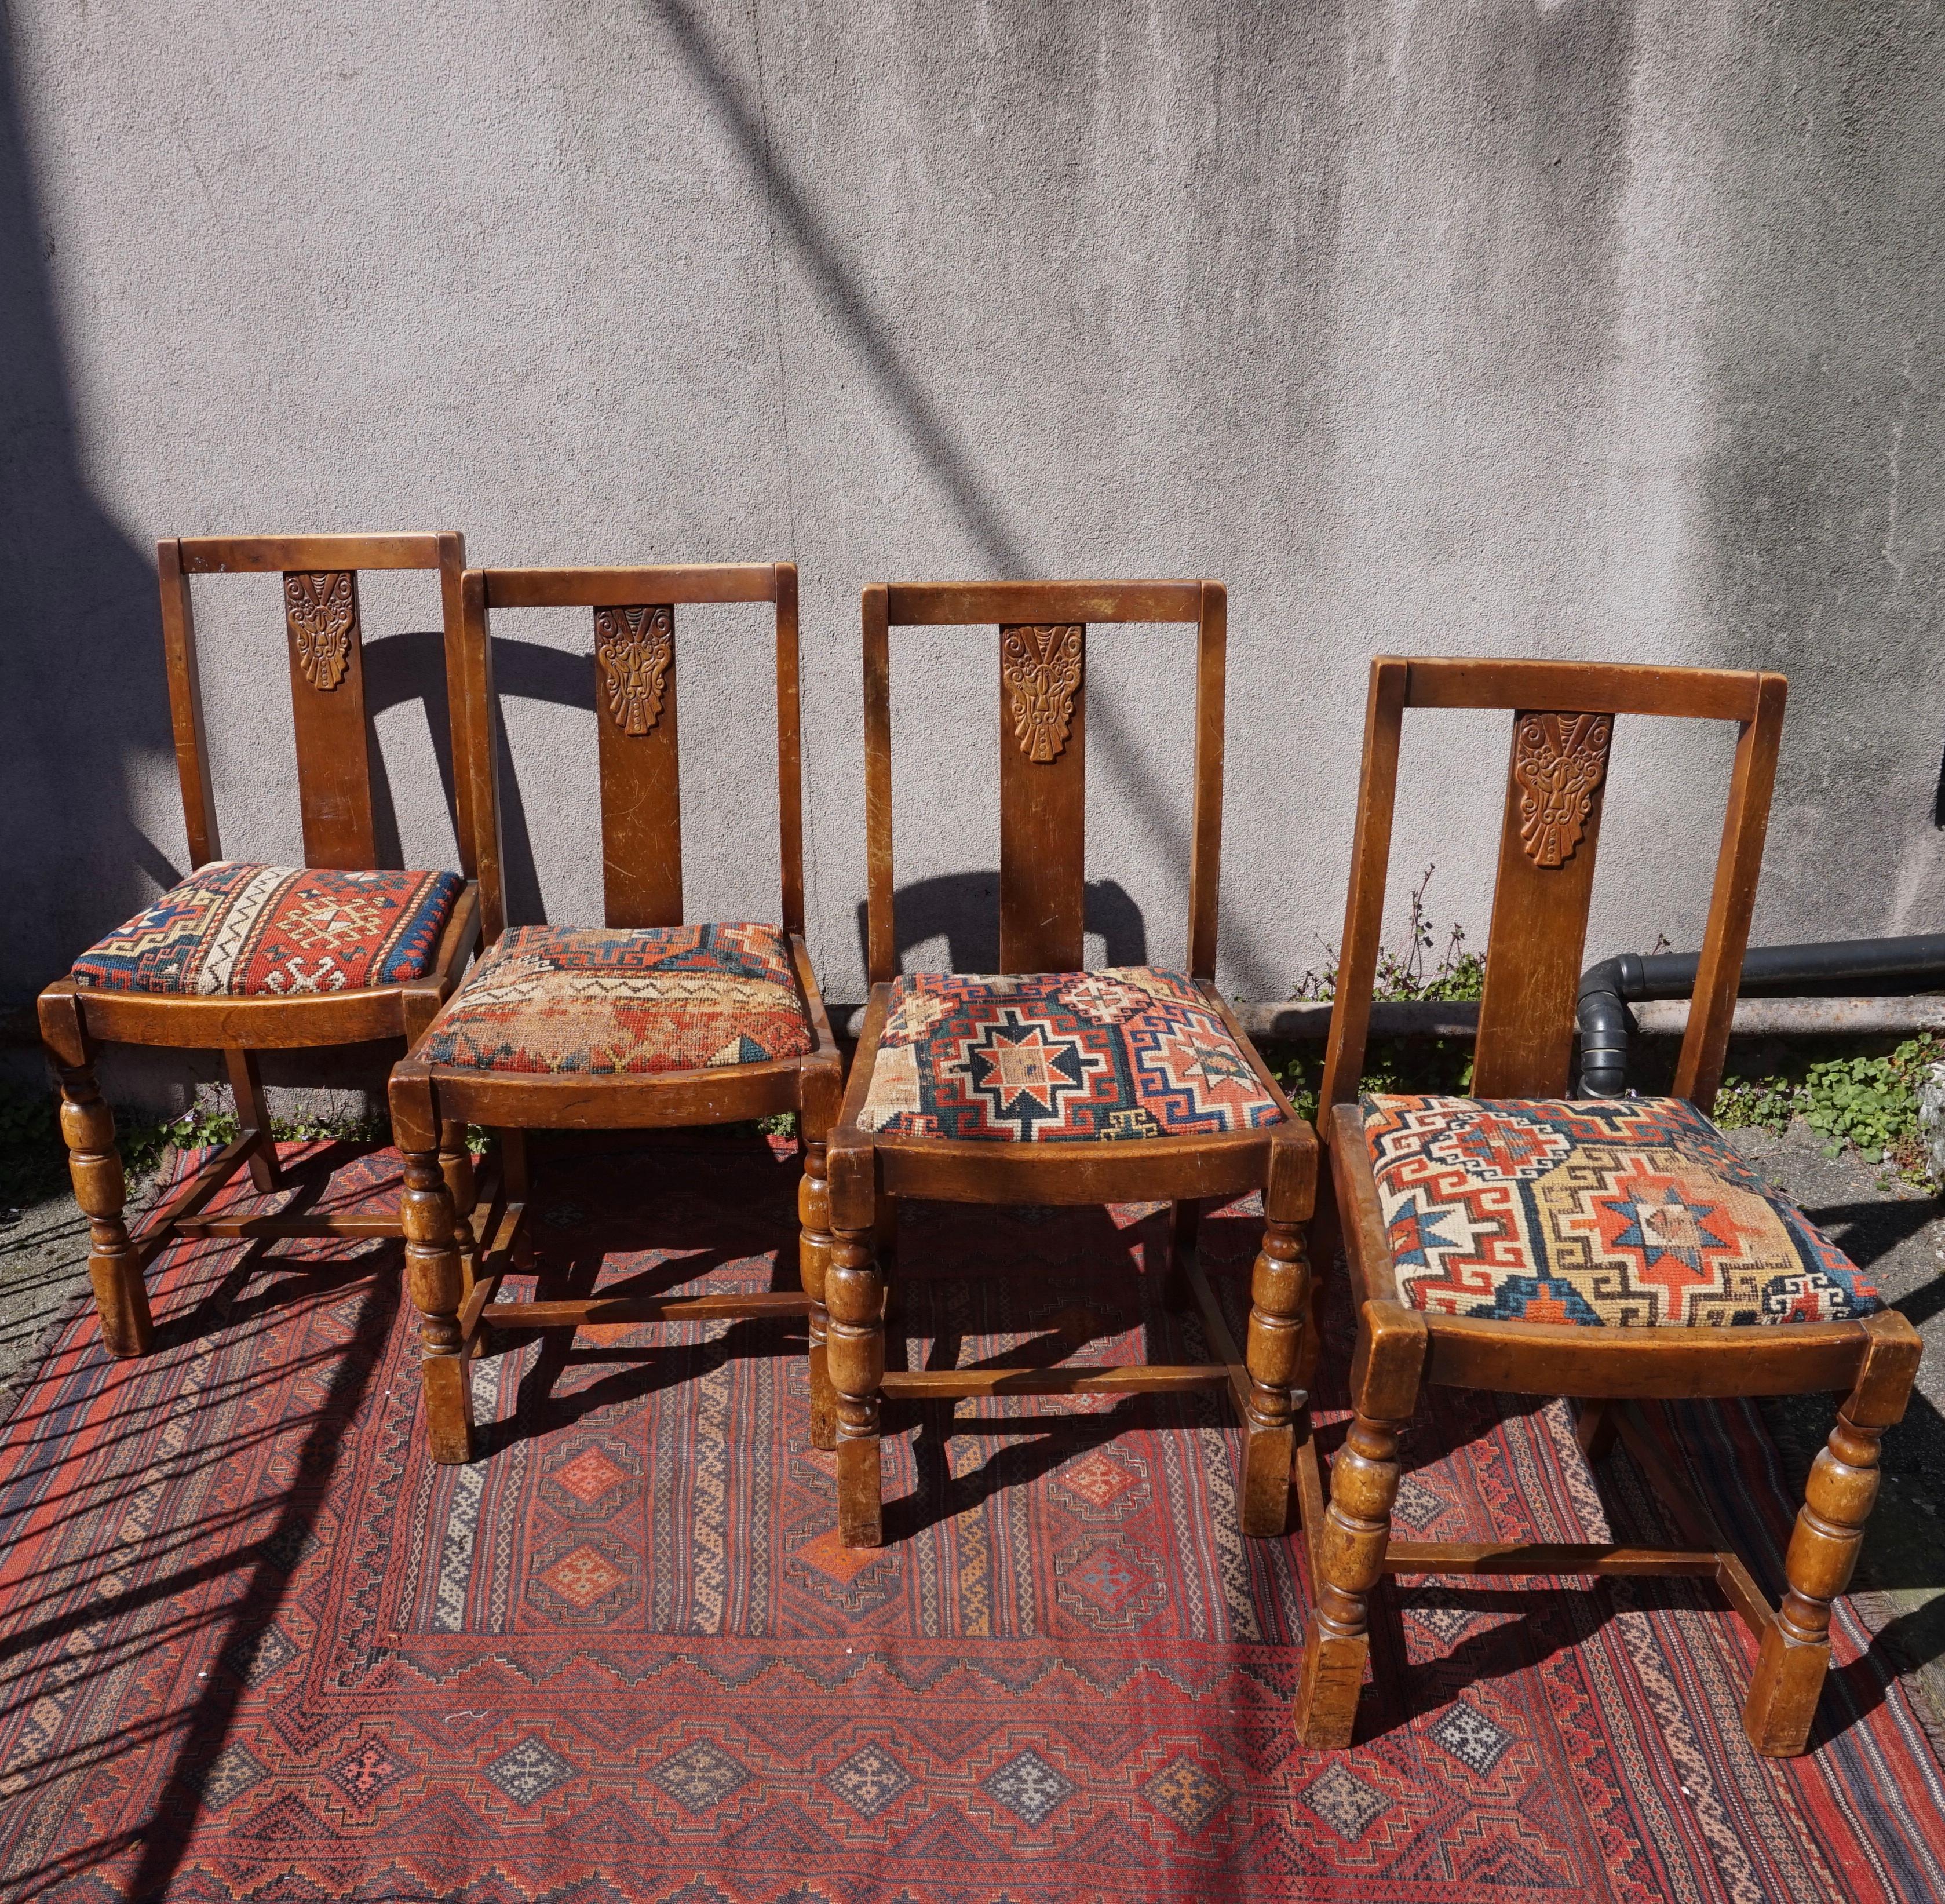 Set of 4 Original Art Deco Chairs & Hand Knotted Antique Caucasus Carpet Seats In Good Condition For Sale In Vancouver, British Columbia